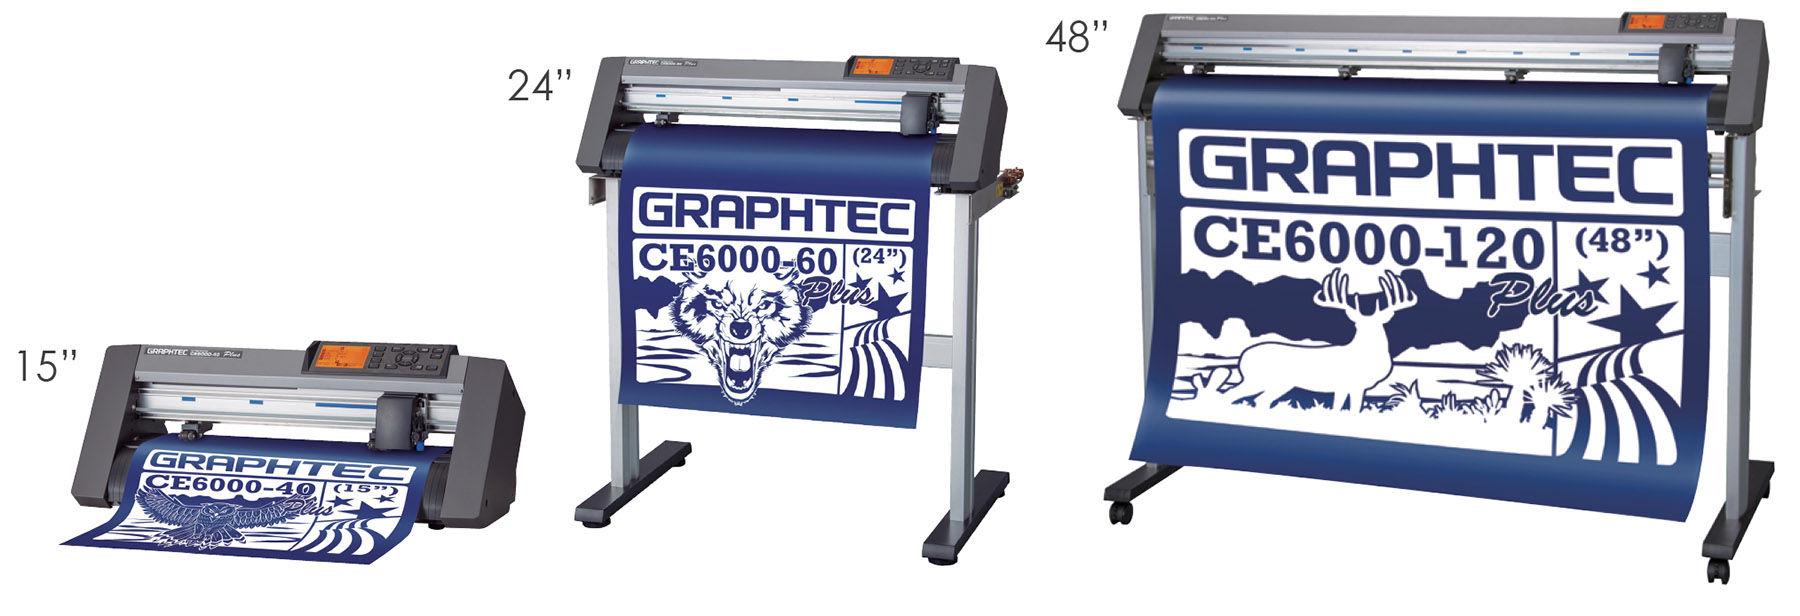 Graphtec CE6000 48 inch Cutter - DISCONTINUED - Epson SureColor